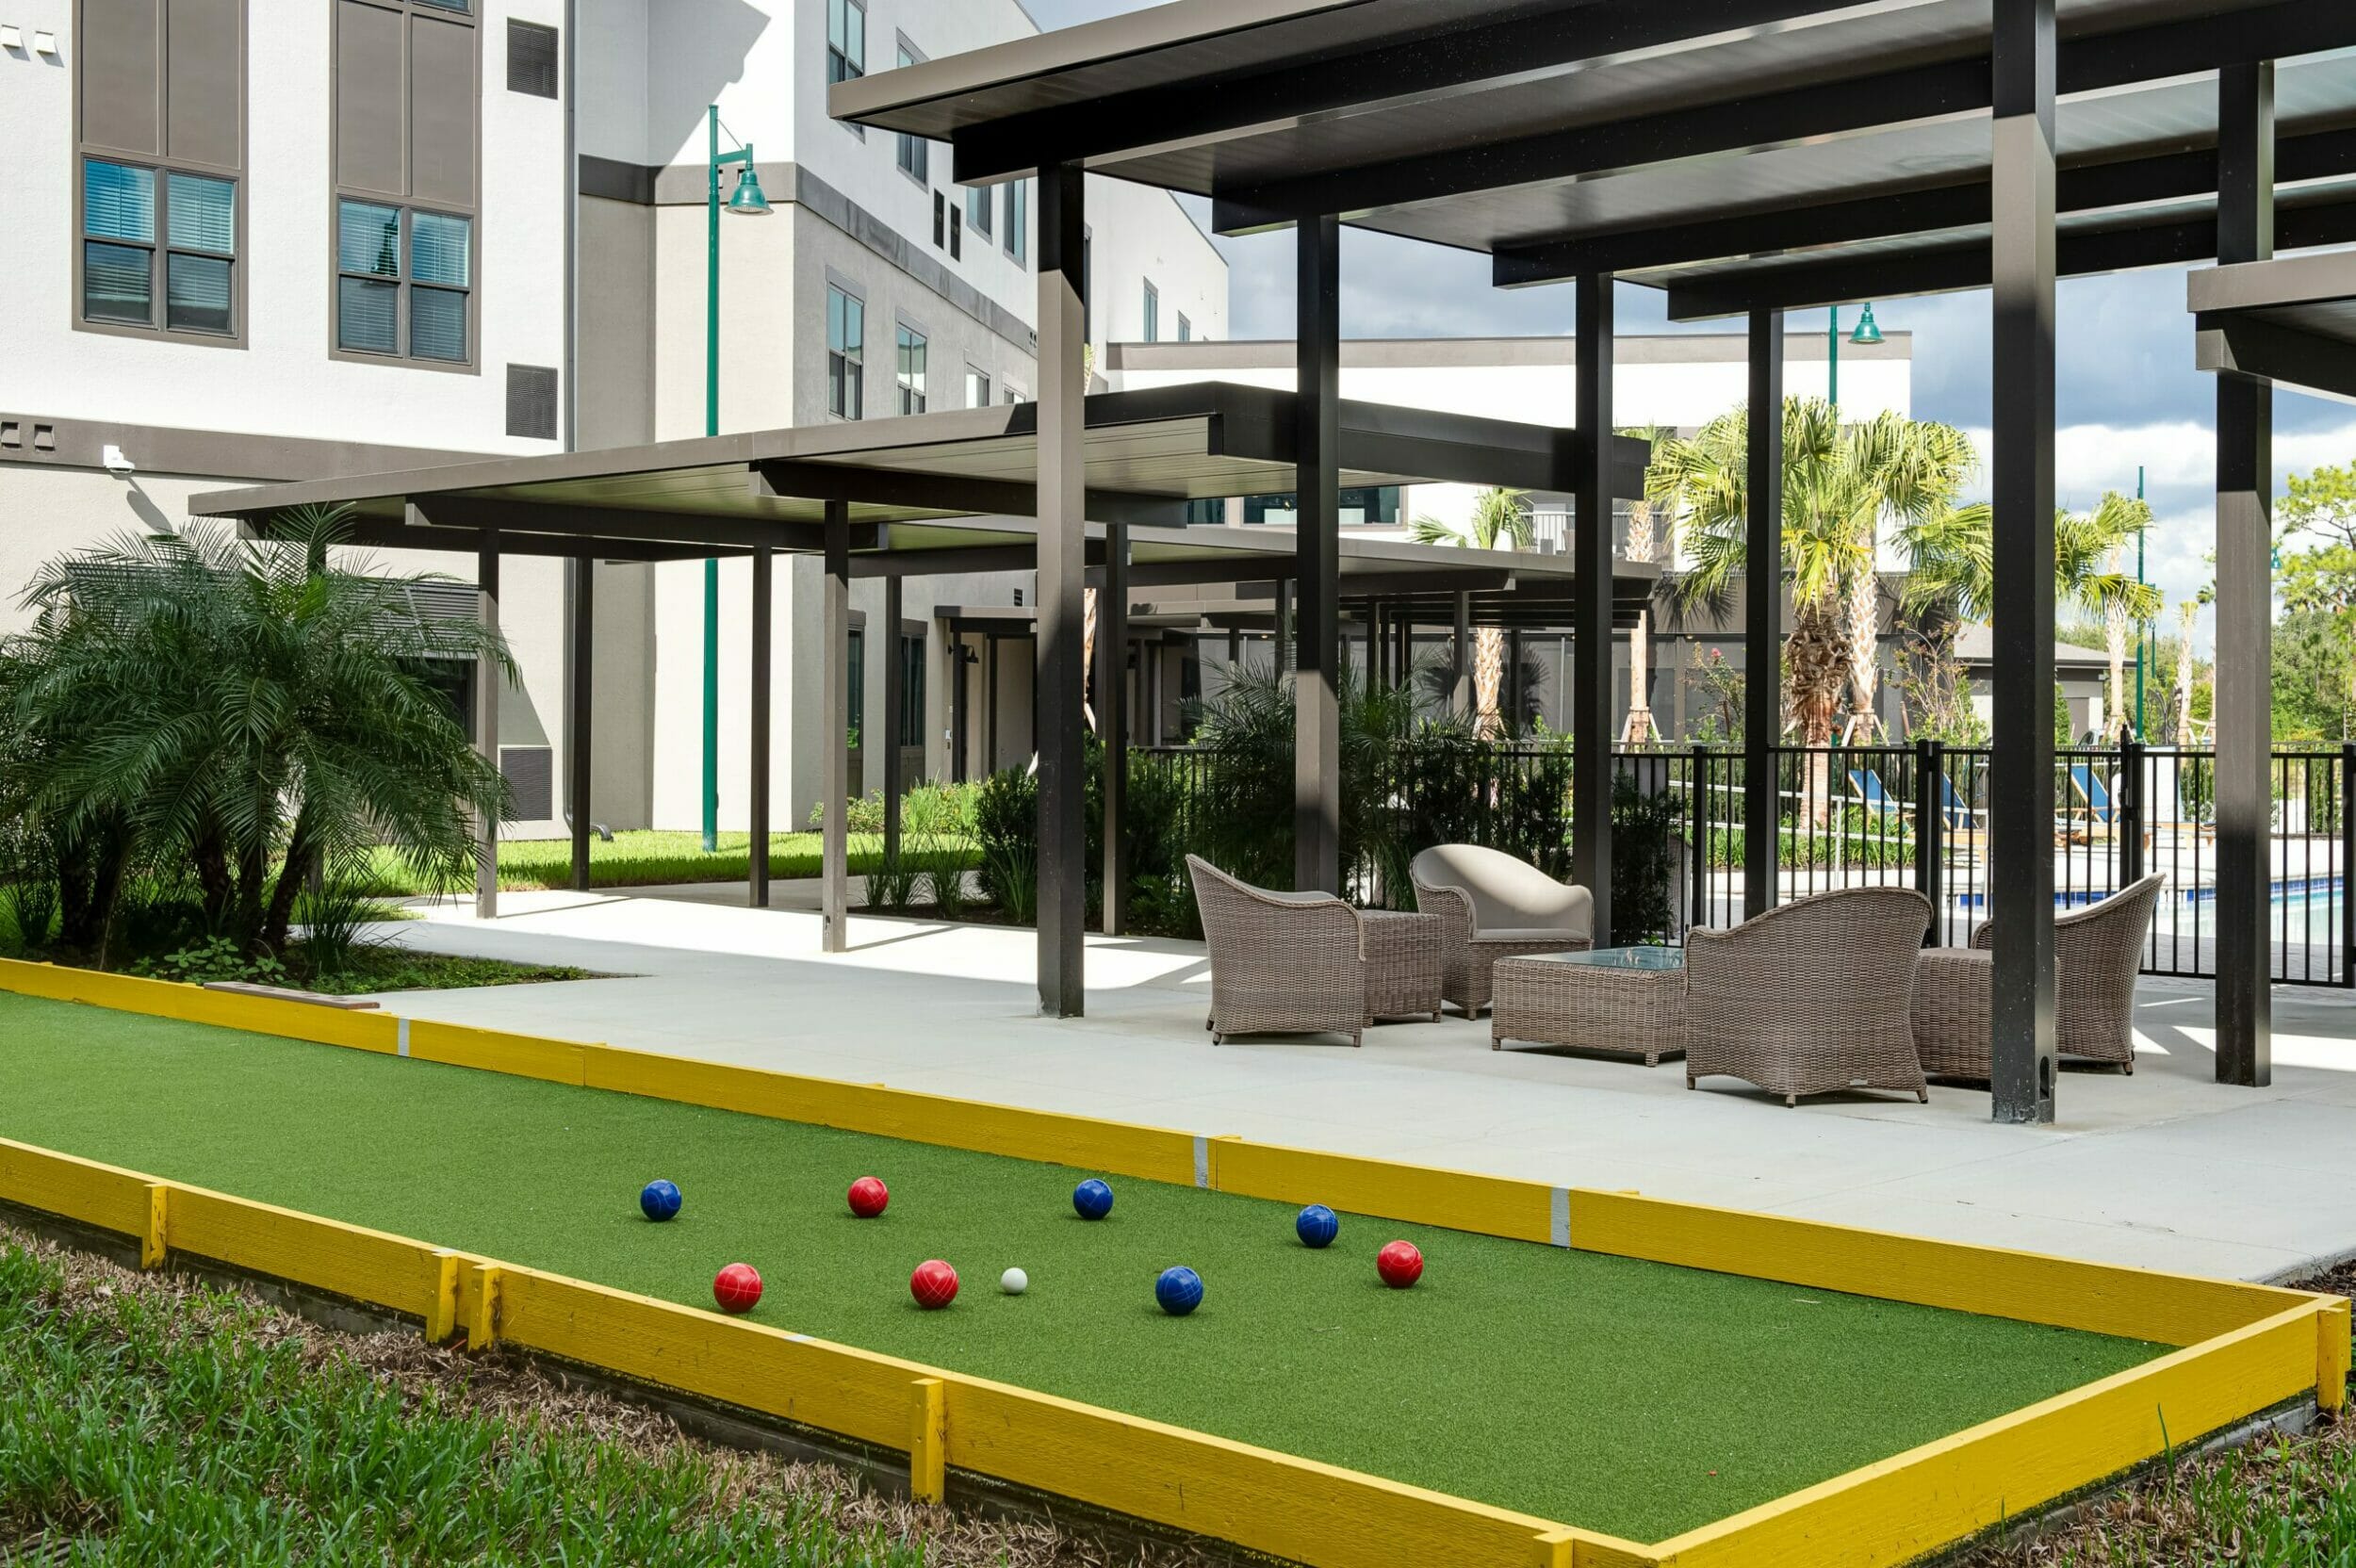 outdoor patio with bocce ball court and lounge area with a view of the pool on the other side of the fence